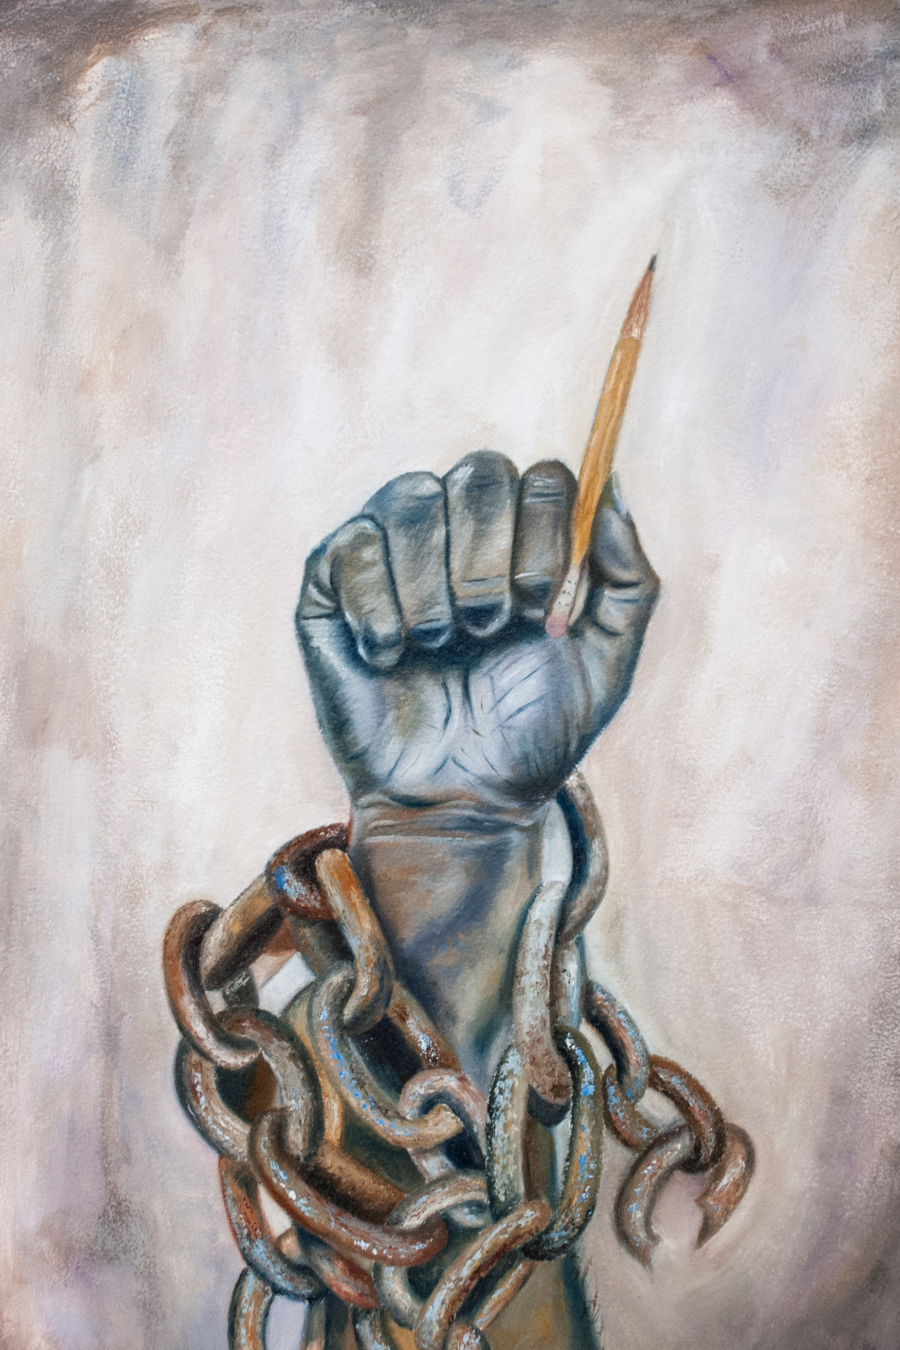 A fist with a pencil 